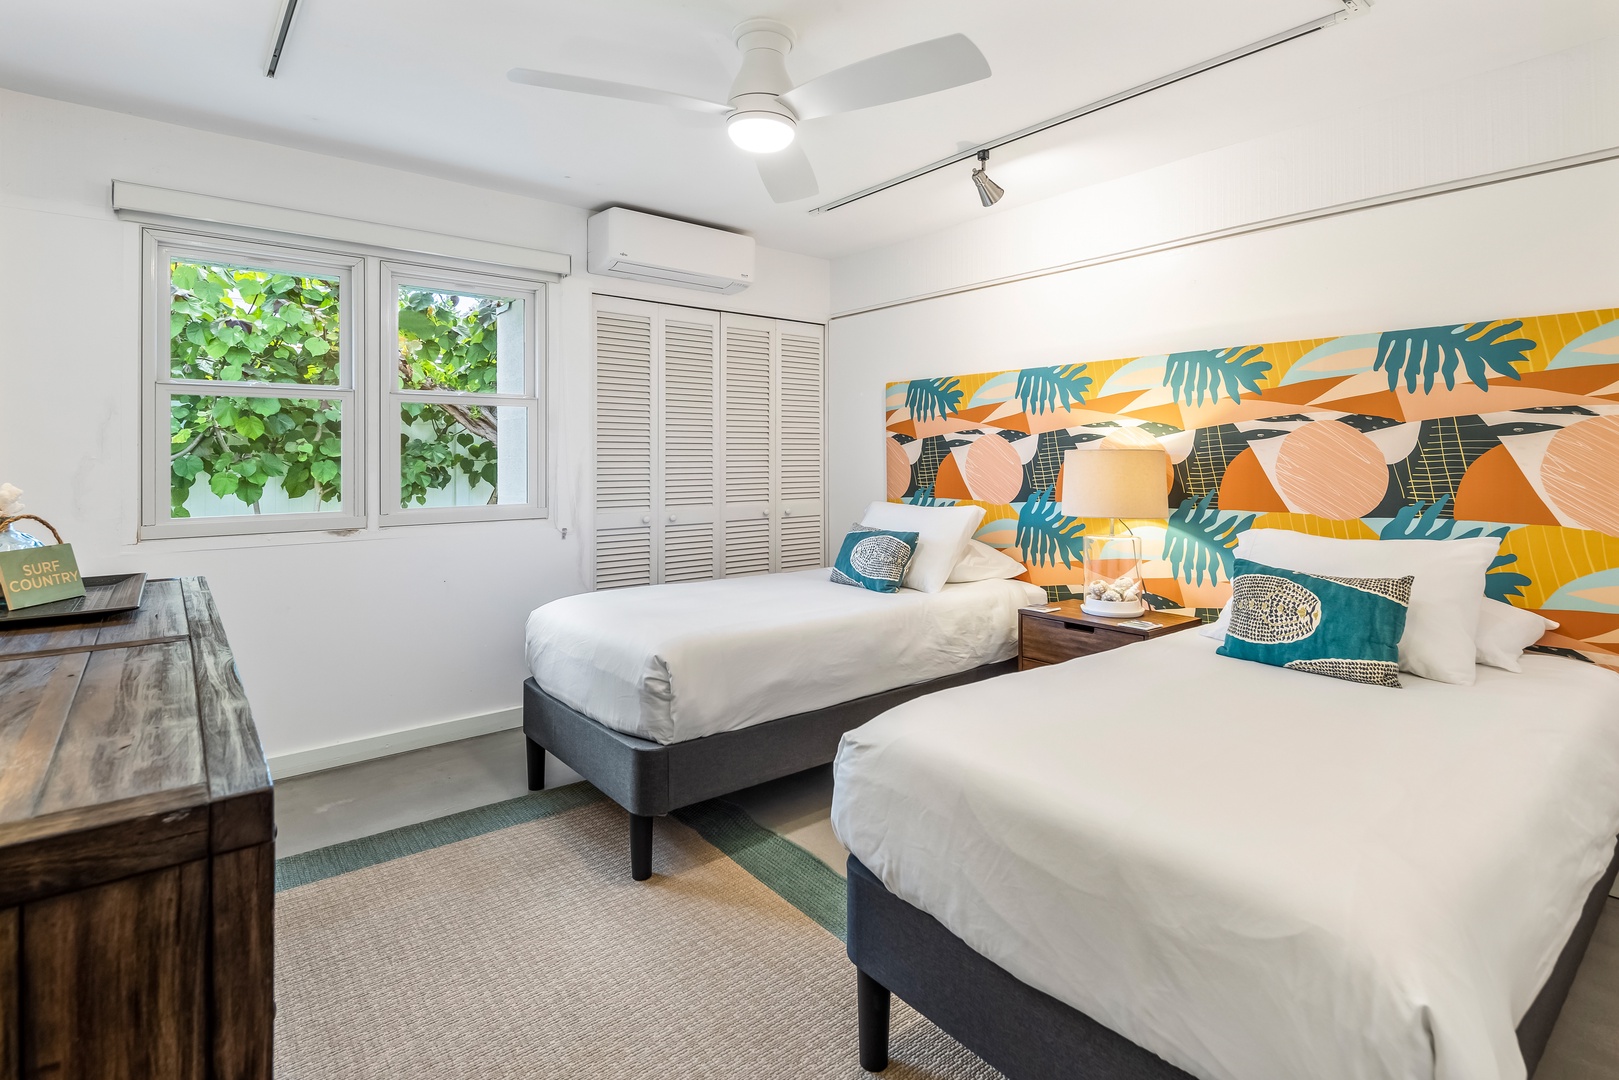 Kailua Vacation Rentals, Lokomaika'i Kailua - Bedroom 5 - two twins convertible to a king with prior request.